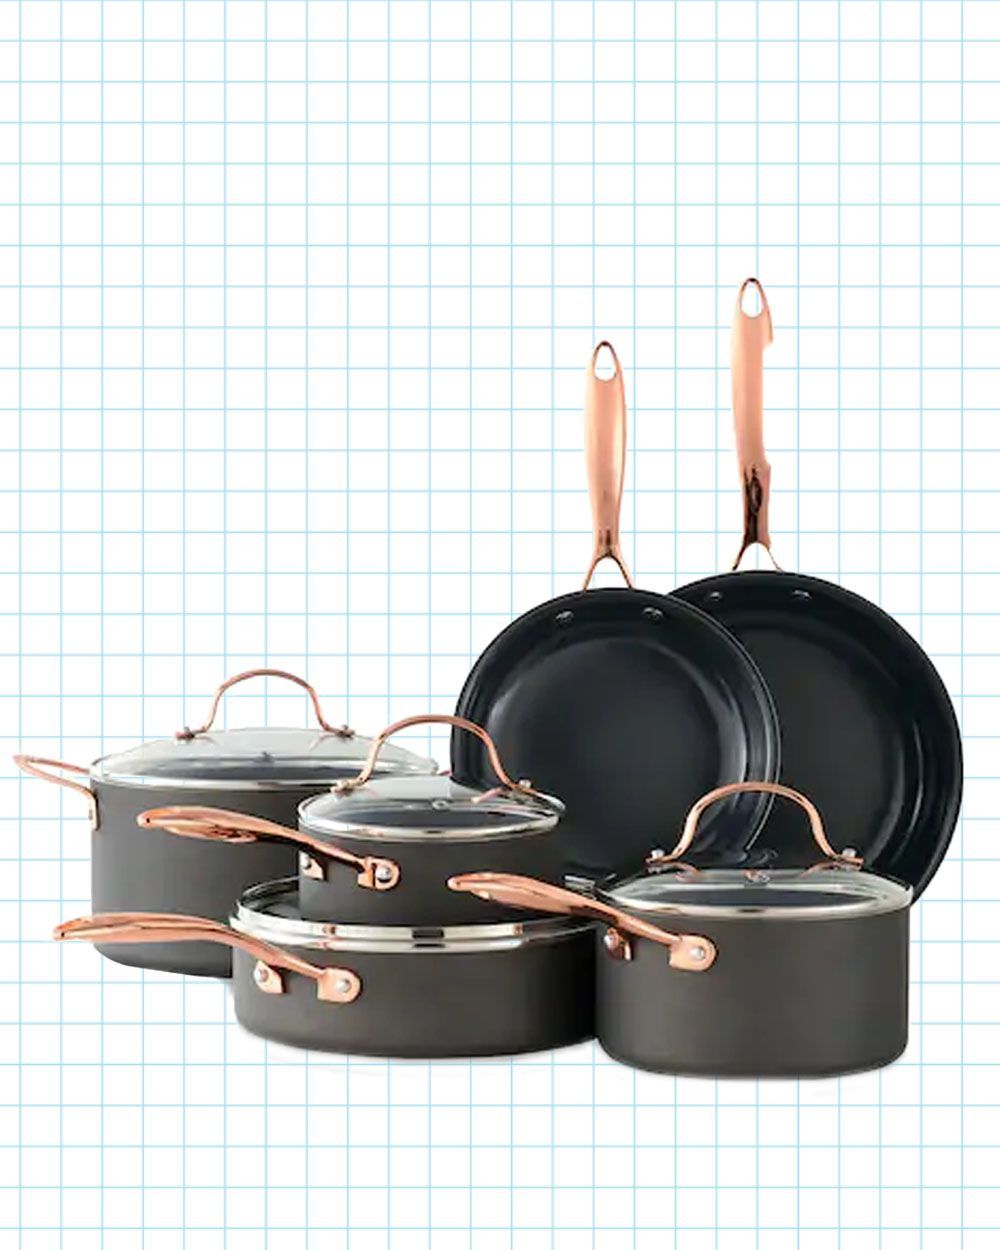 1551408861 Gh Institute Ceramic Dishset Grid Product Slides 04 Food Network 1551408810 ?crop=1xw 1xh;center,top